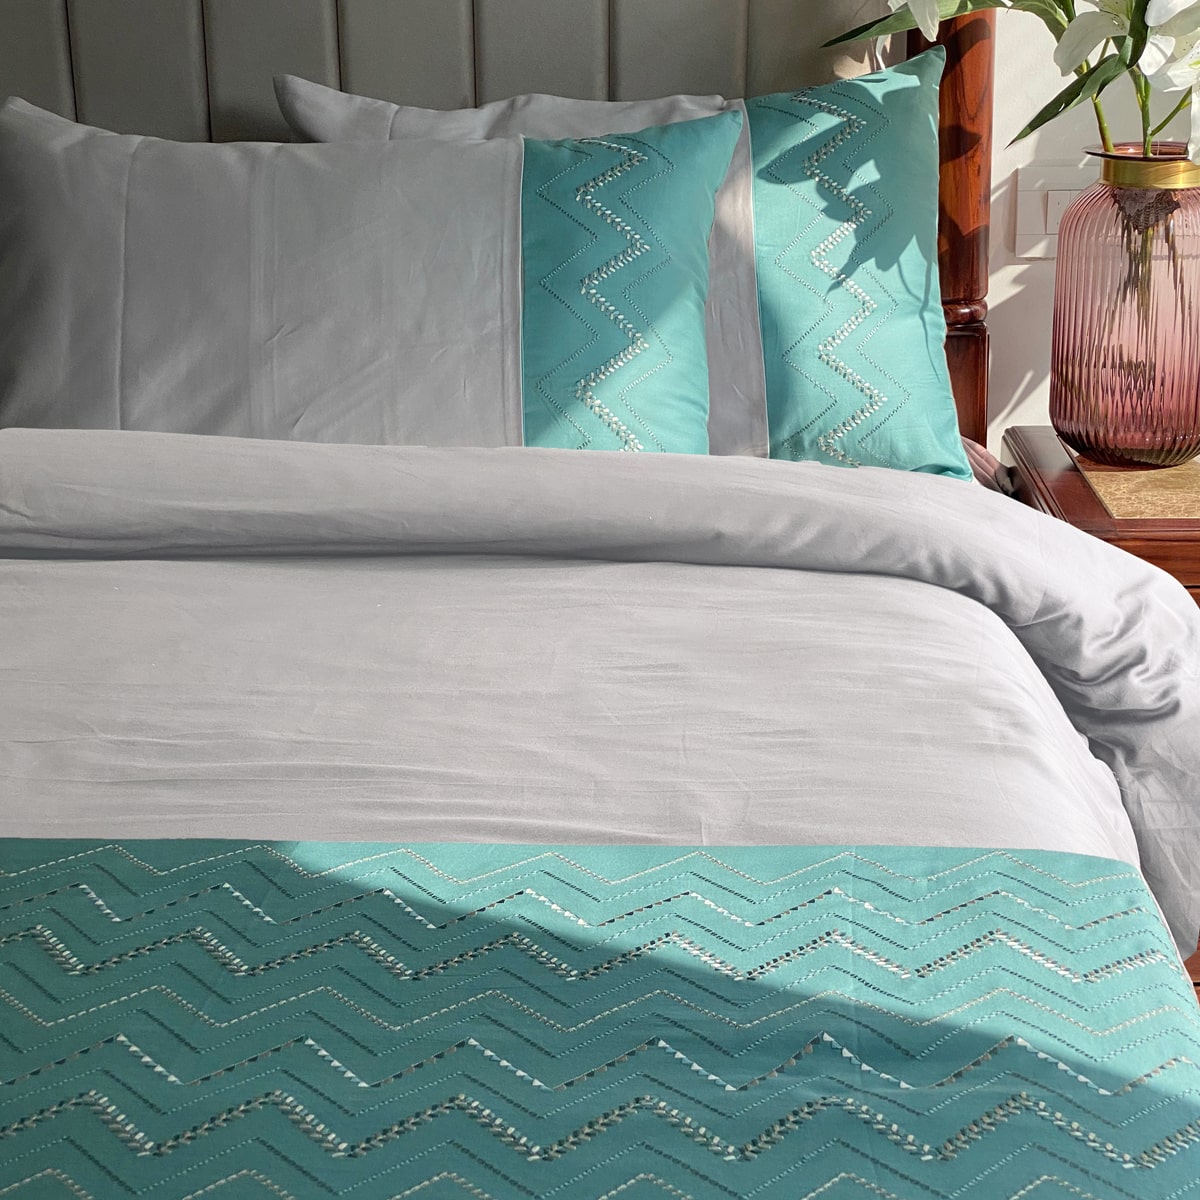 Chevron Turquoise and Grey Duvet Cover